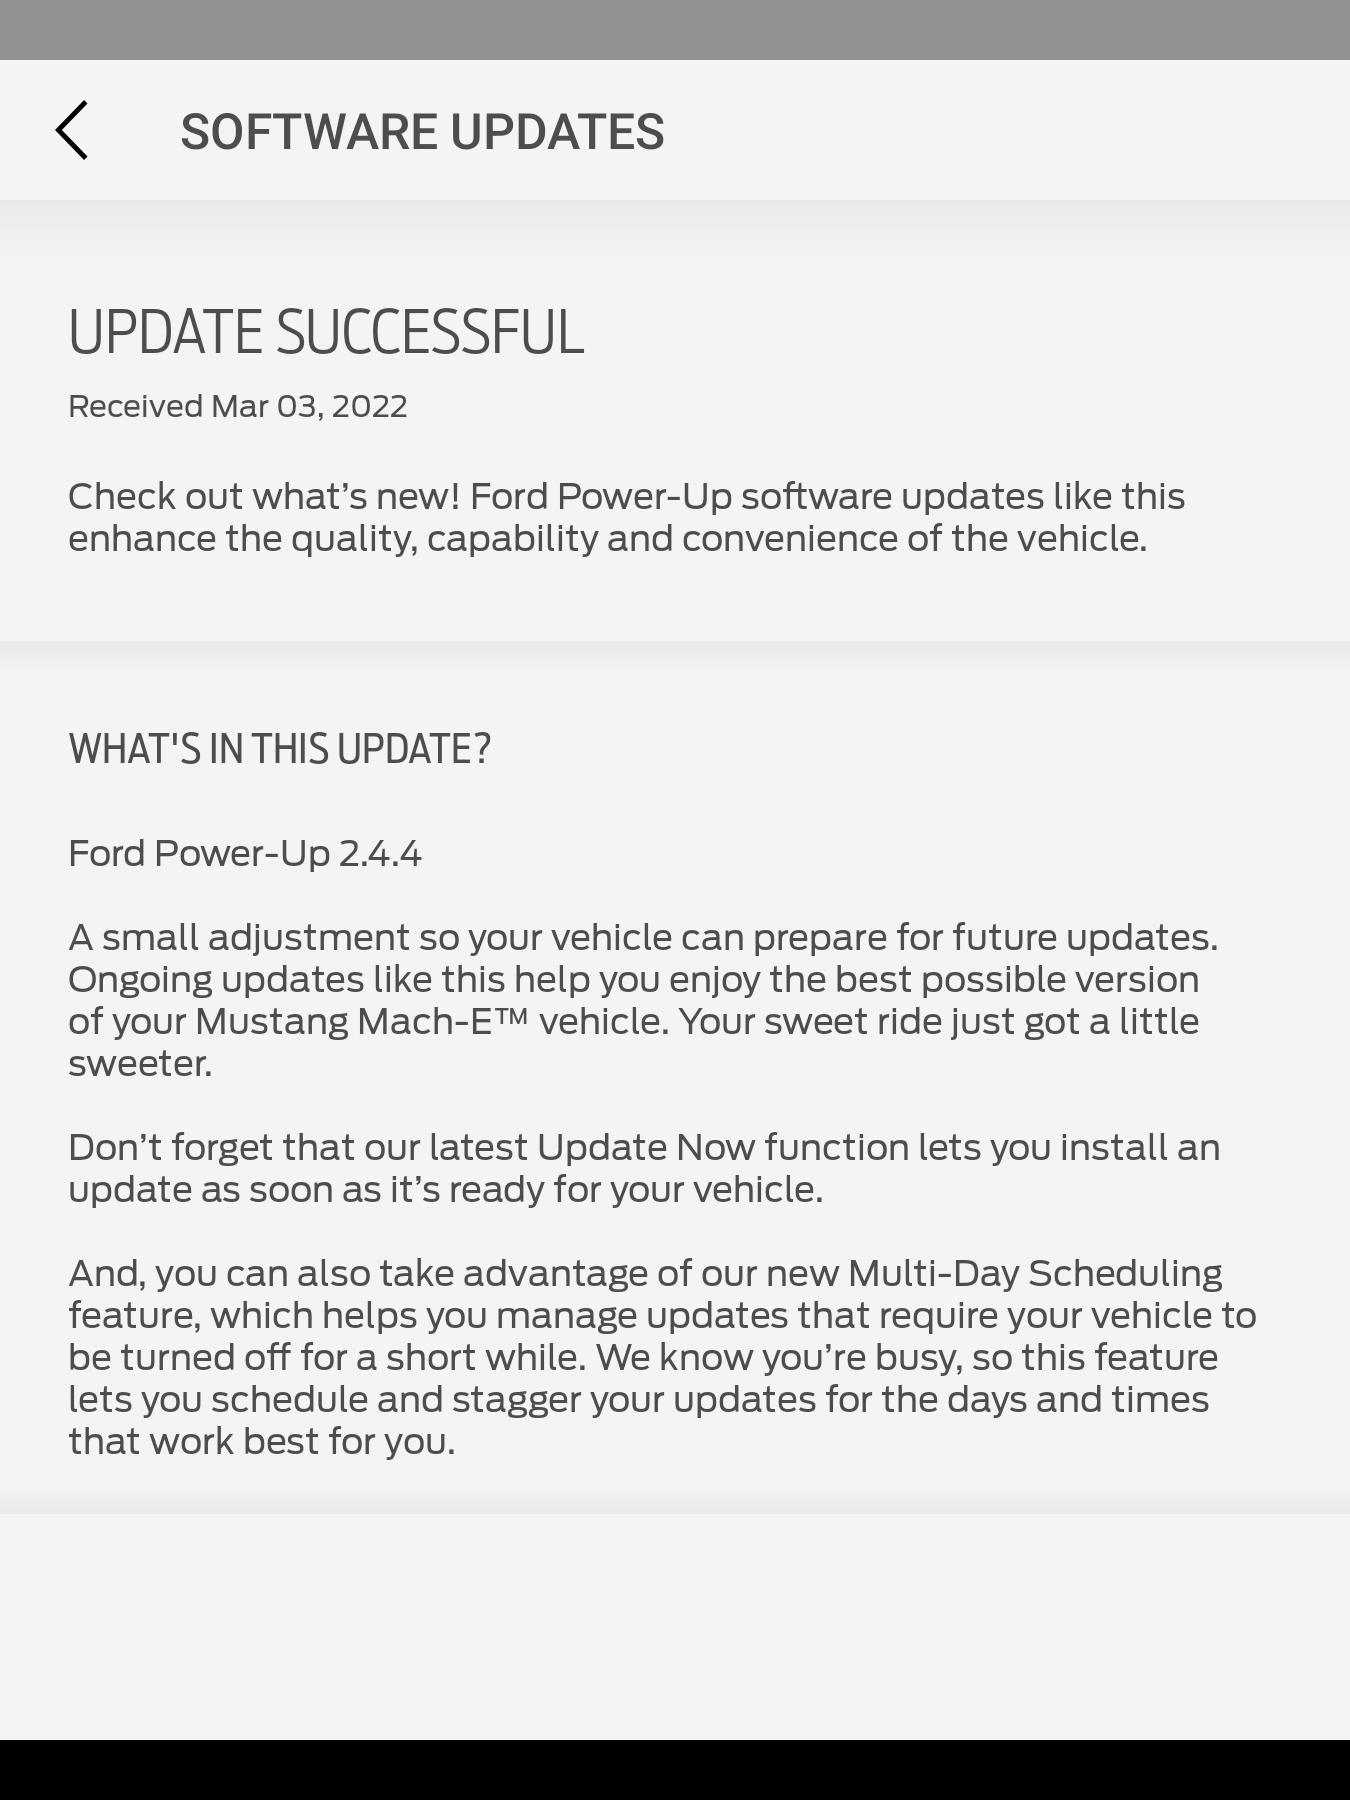 Power up 2.4.4 now installing., Page 10